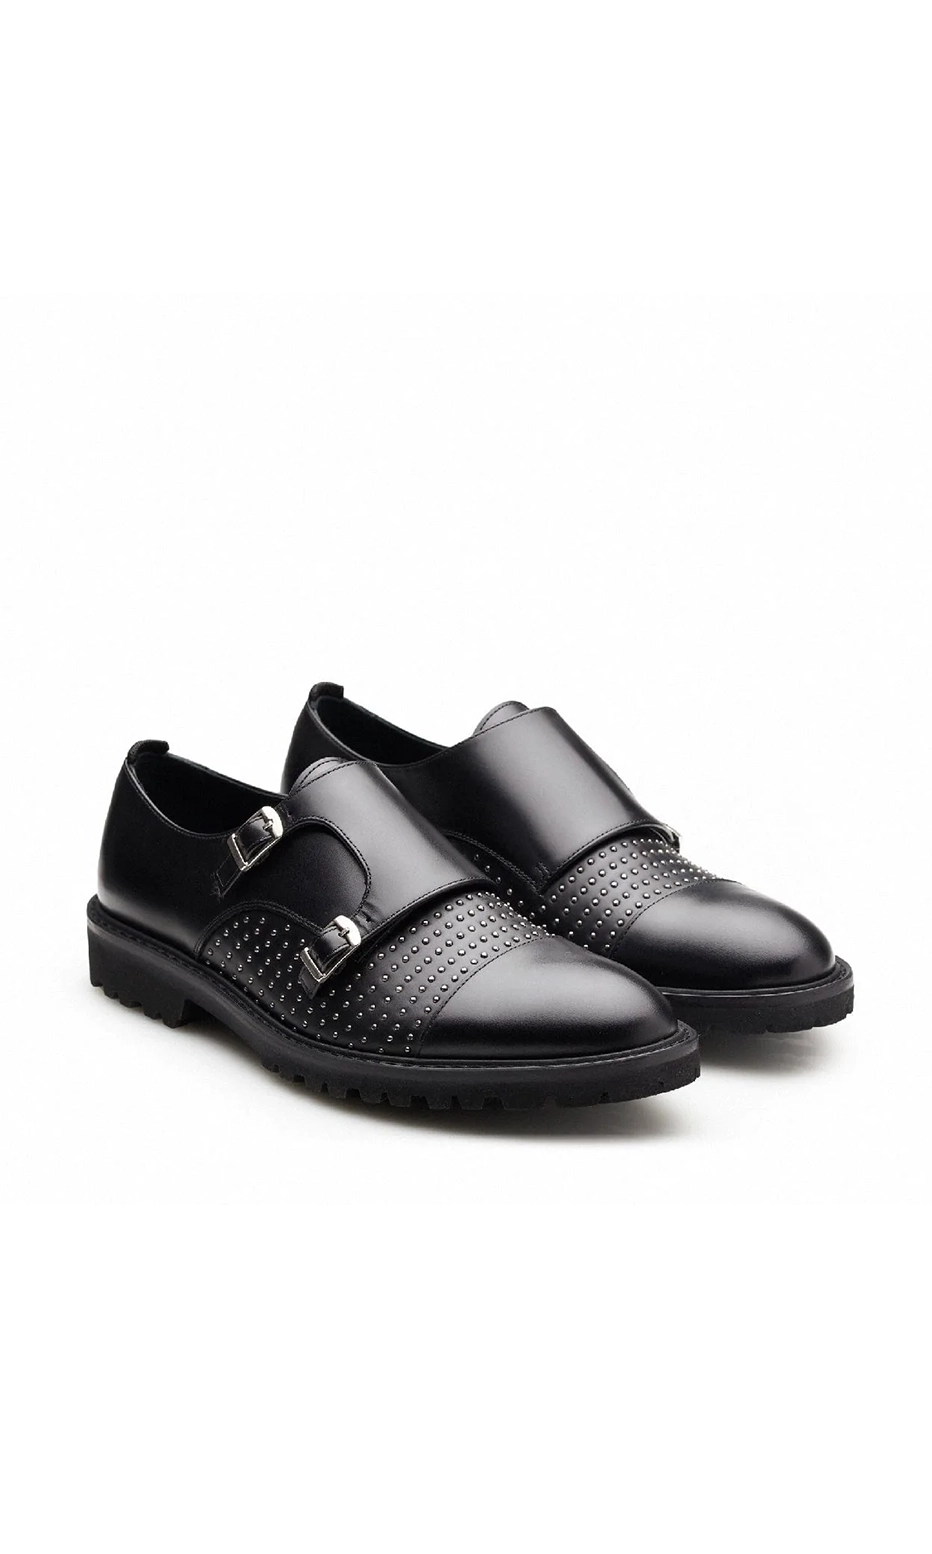 black monk shoes mariano